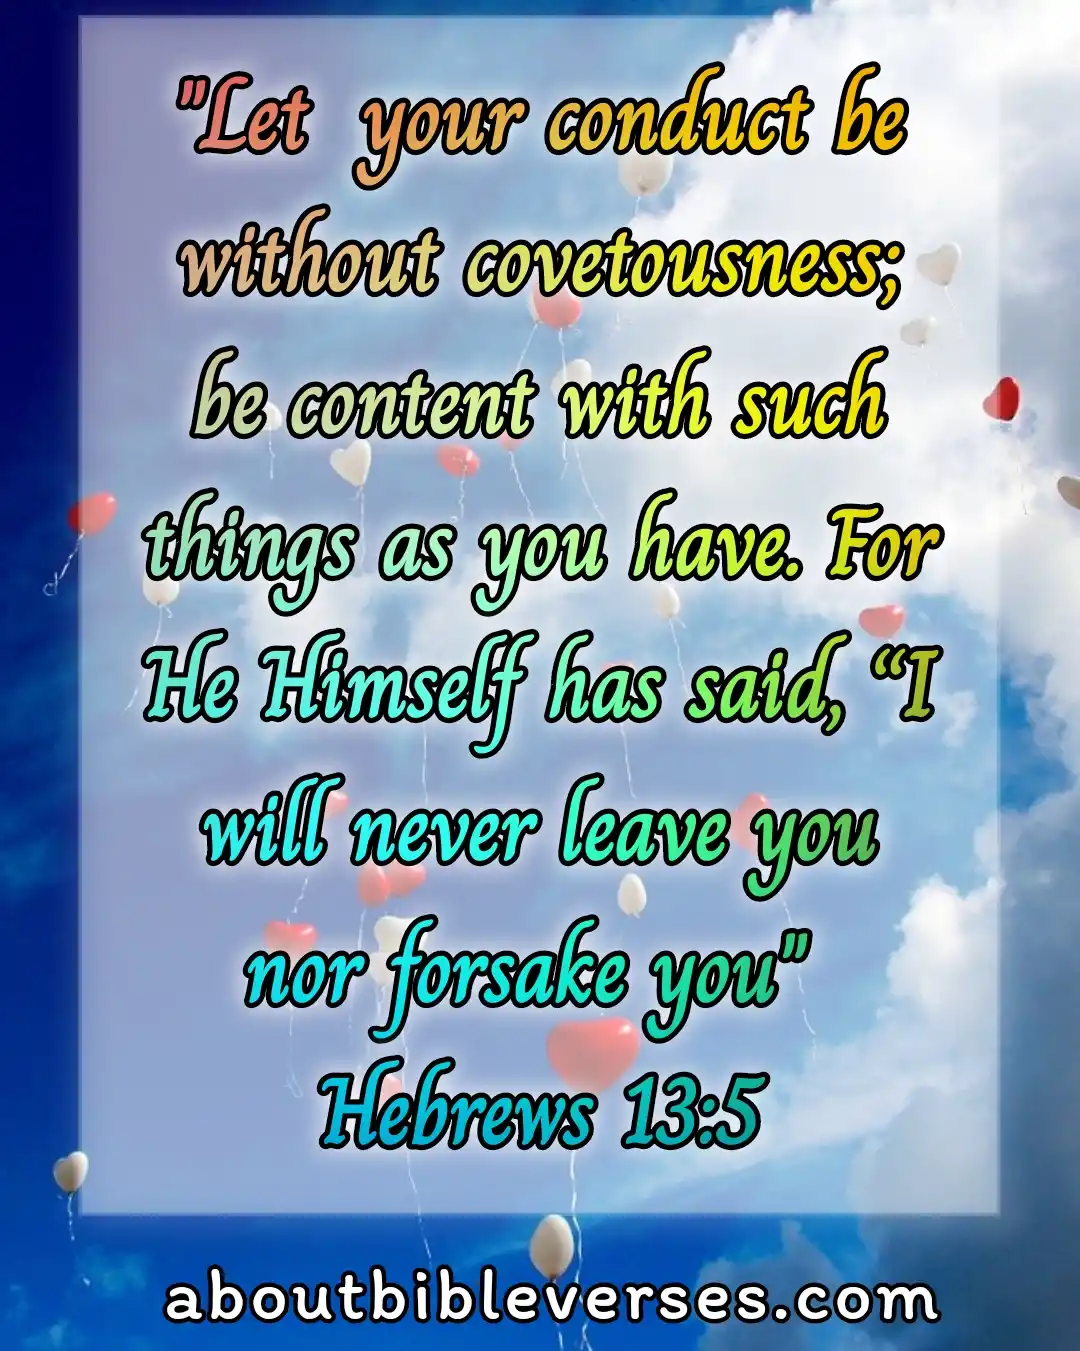 Bible verses for youth (Hebrews 13:5)